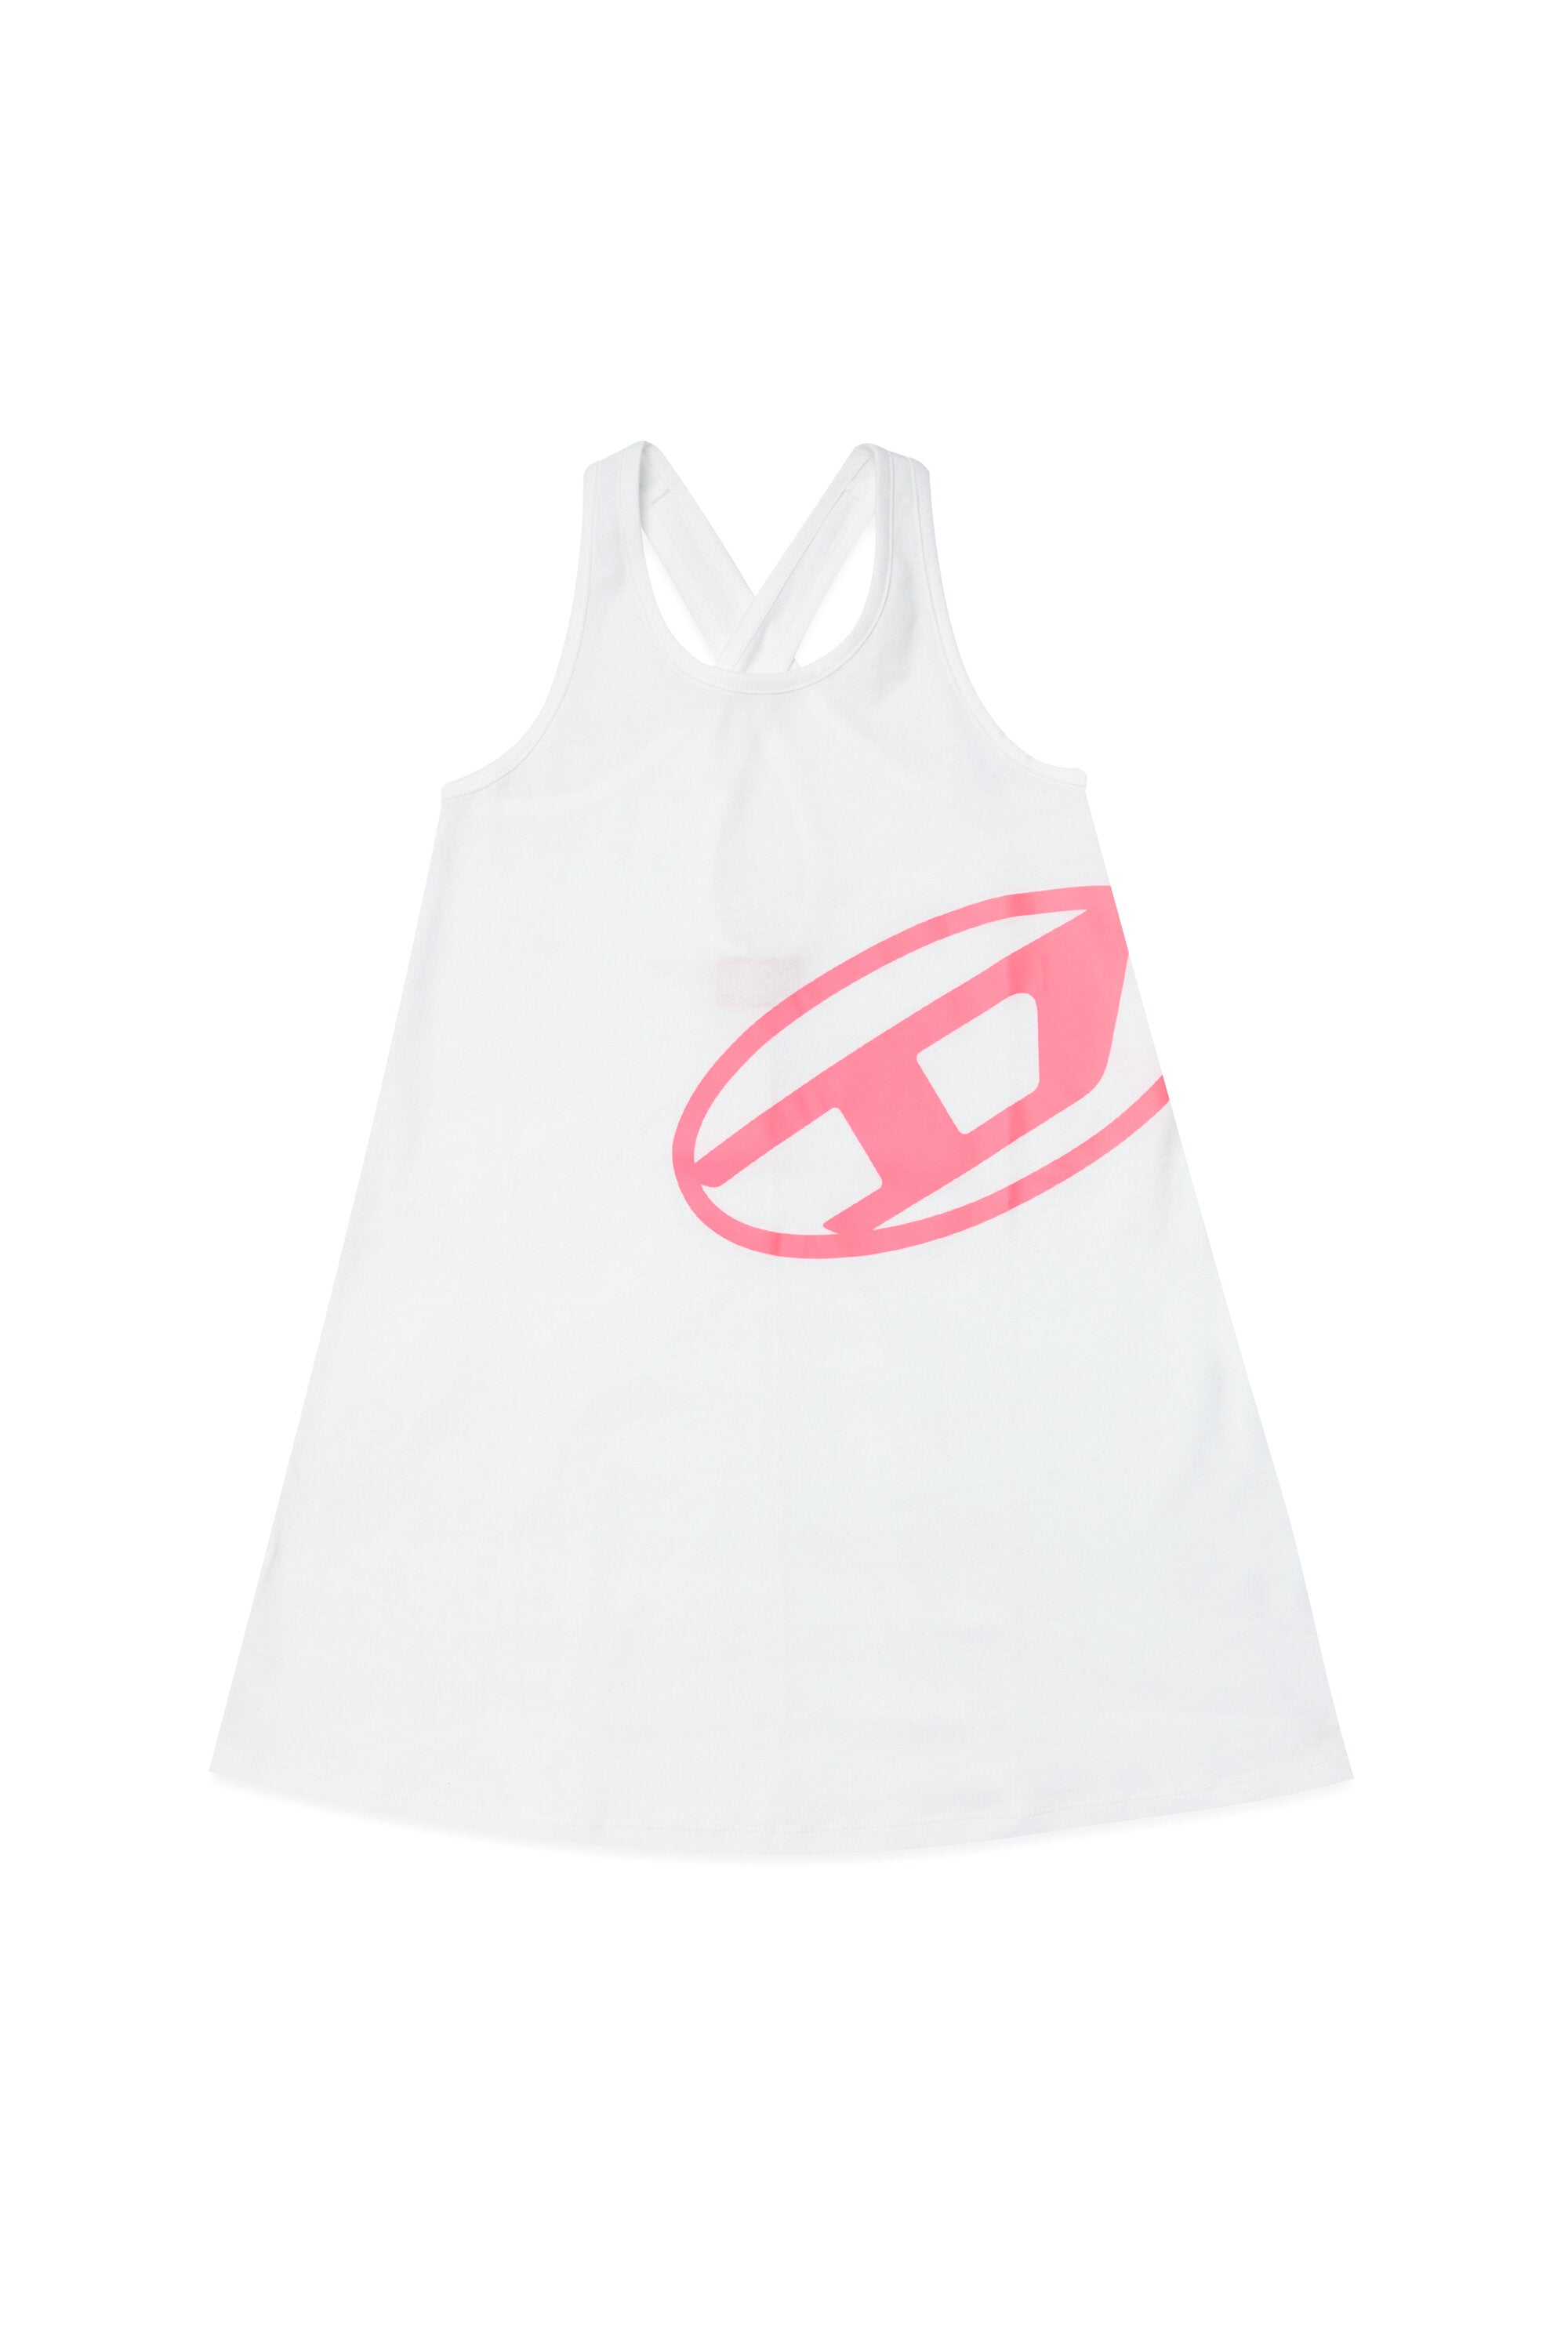 Oval D jersey cover-up dress